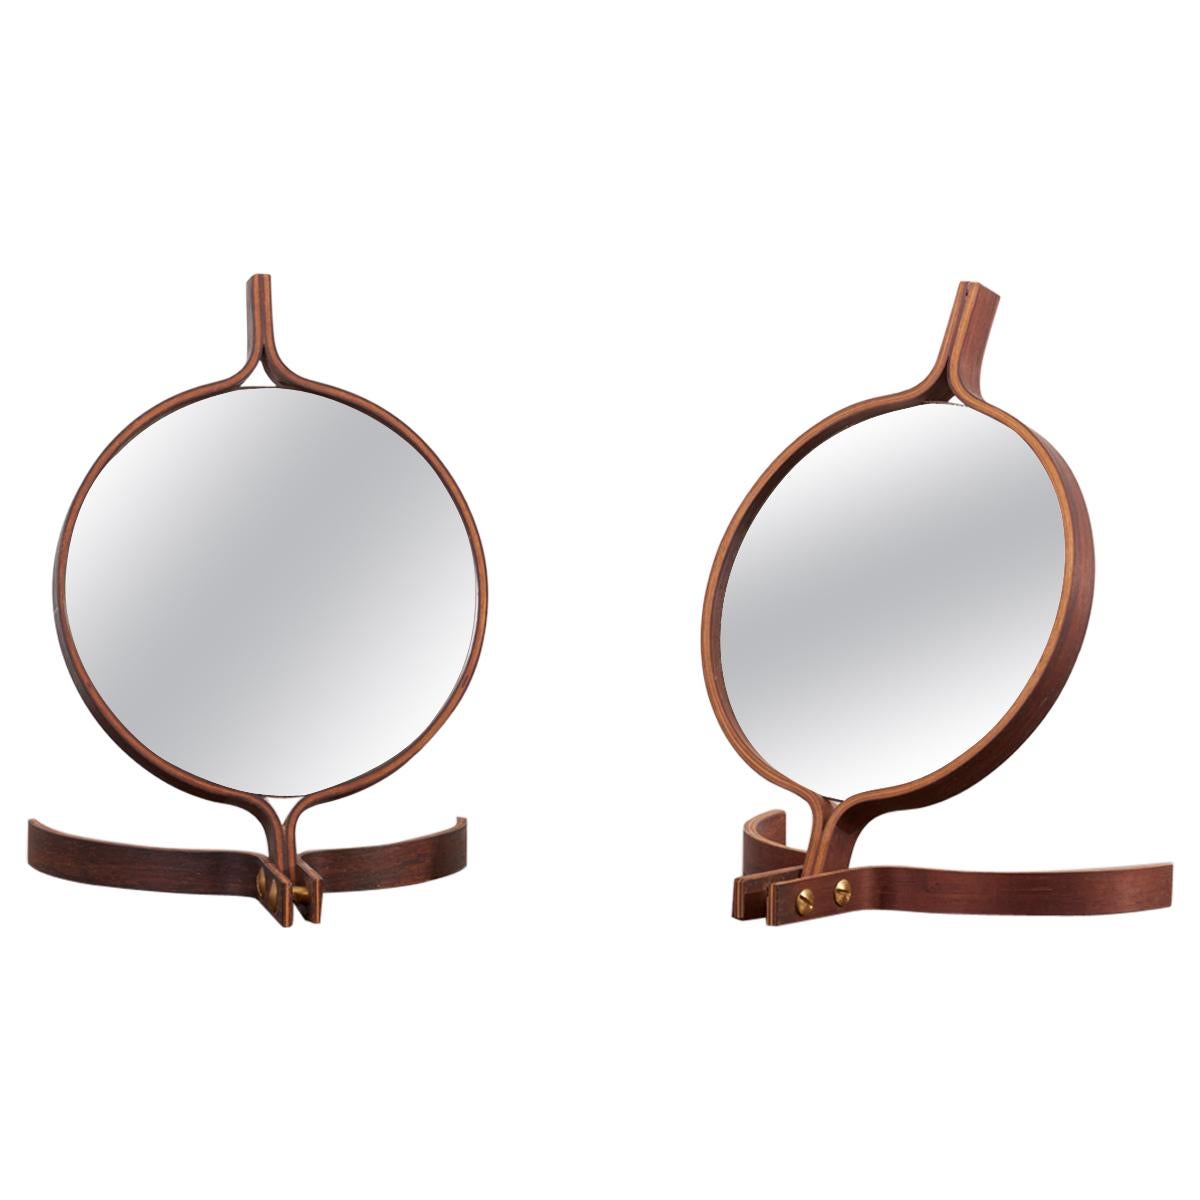 1 of 4 Hand or Table Mirror by Bech & Starup for Den Permanente Copenhagen For Sale